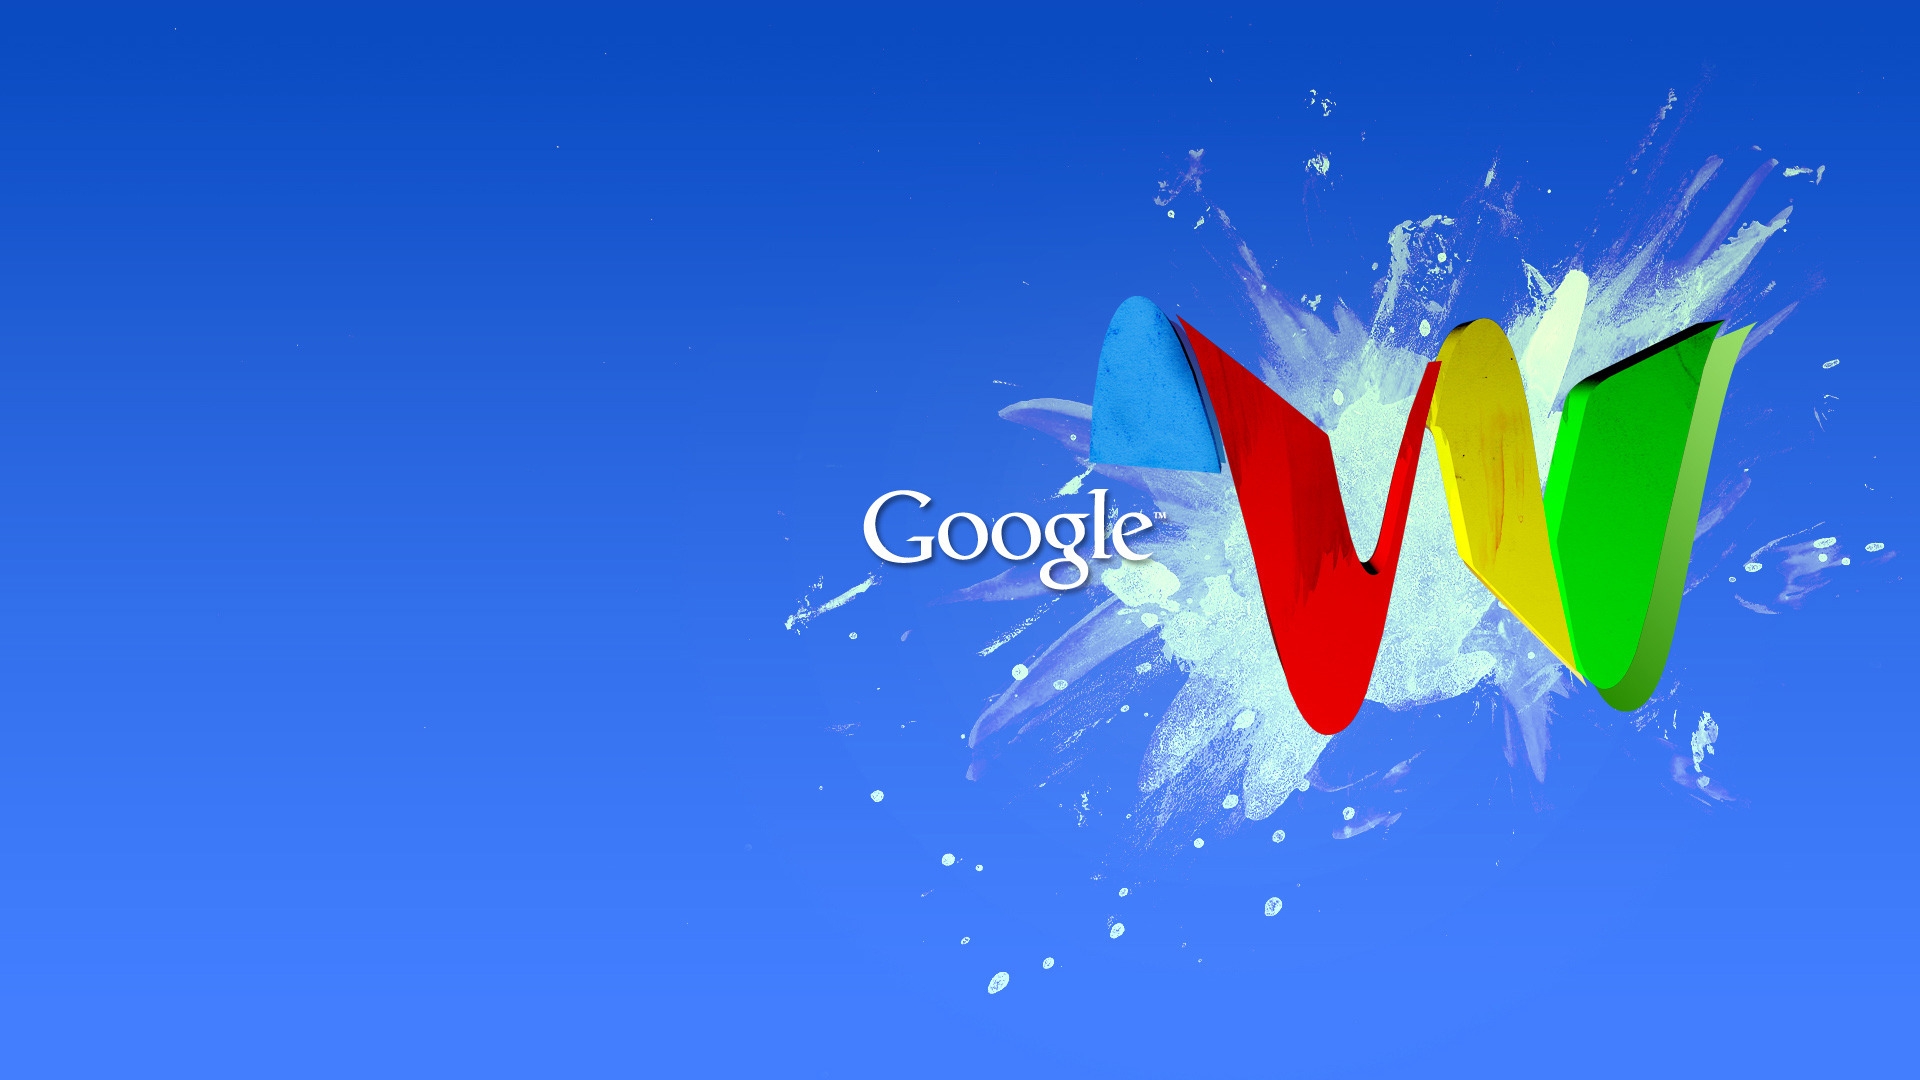 Google Wave for 1920 x 1080 HDTV 1080p resolution